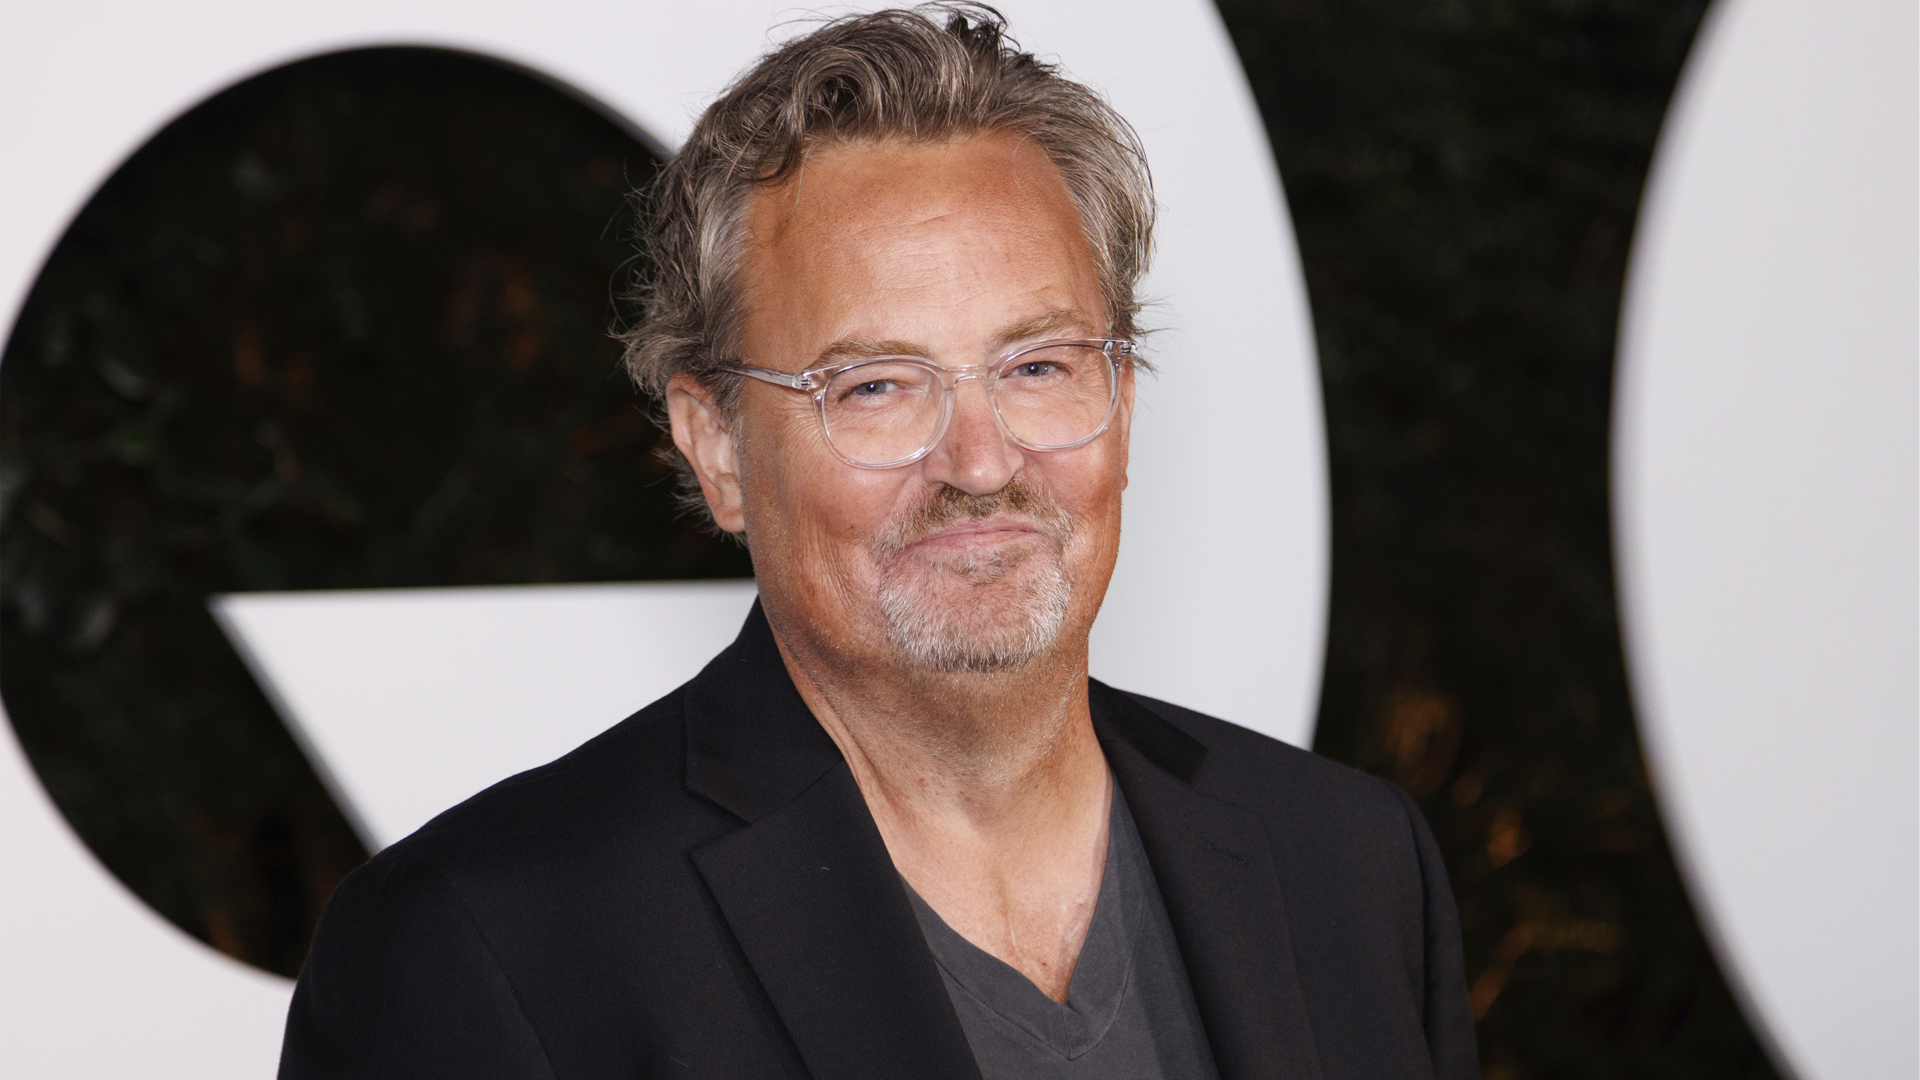 'Friends' Star Matthew Perry Dead at 54 in Apparent Drowning